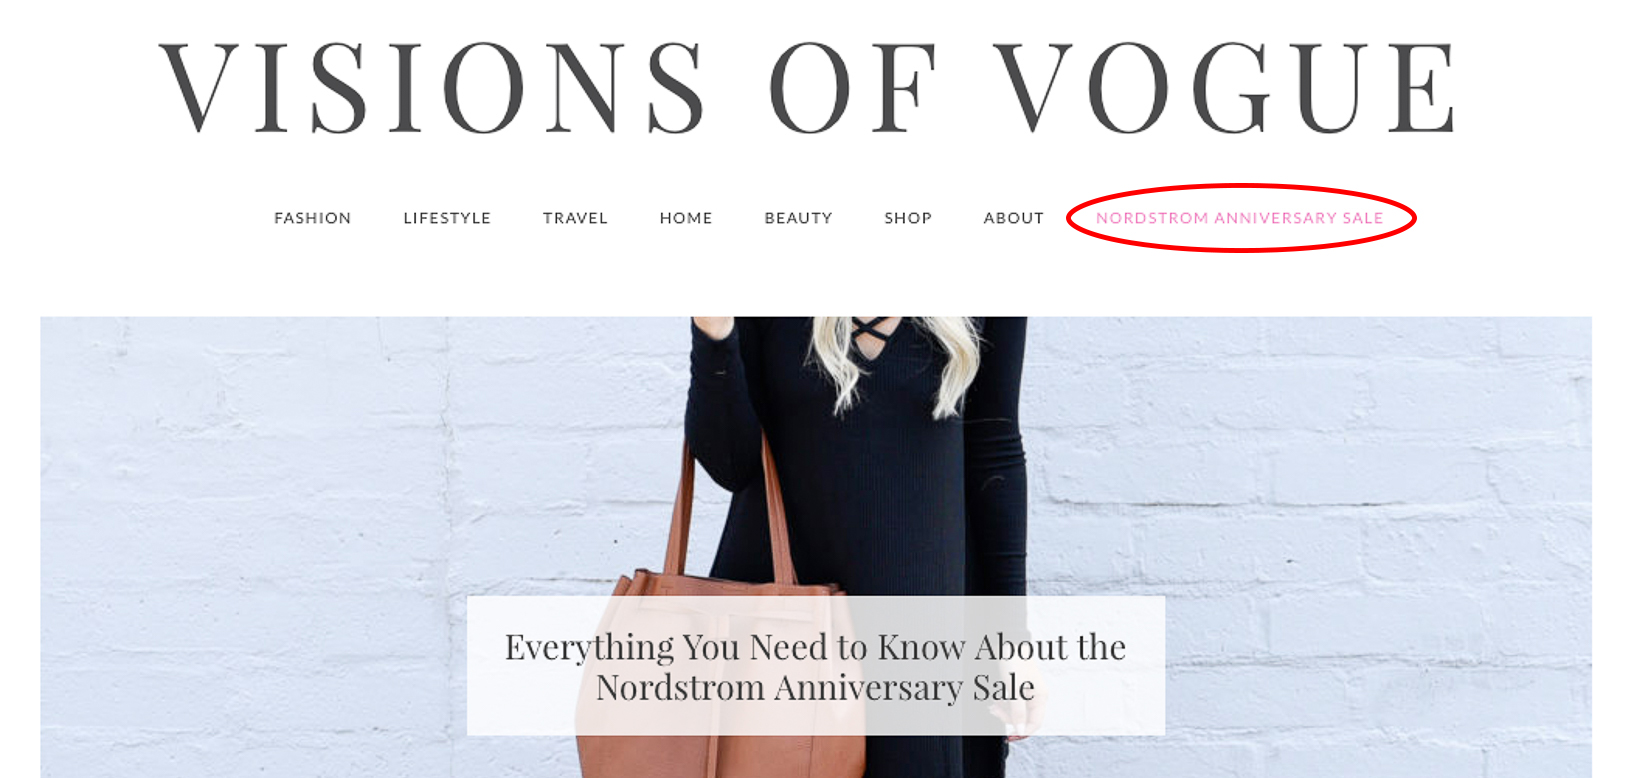 tips to shop the nordstrom anniversary sale